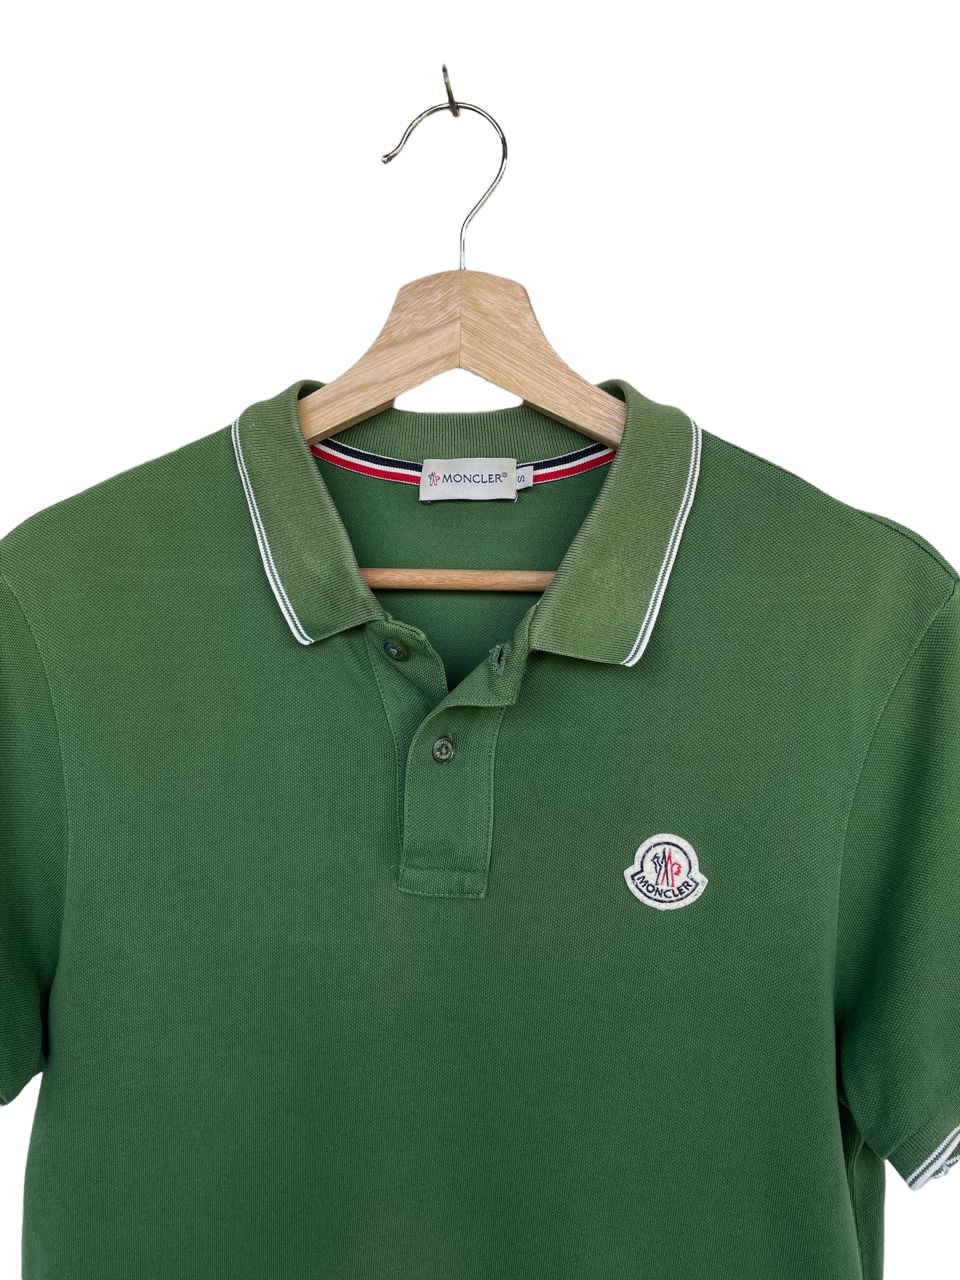 Authentic!! Moncler Ringer Button up Polo Shirt - 4